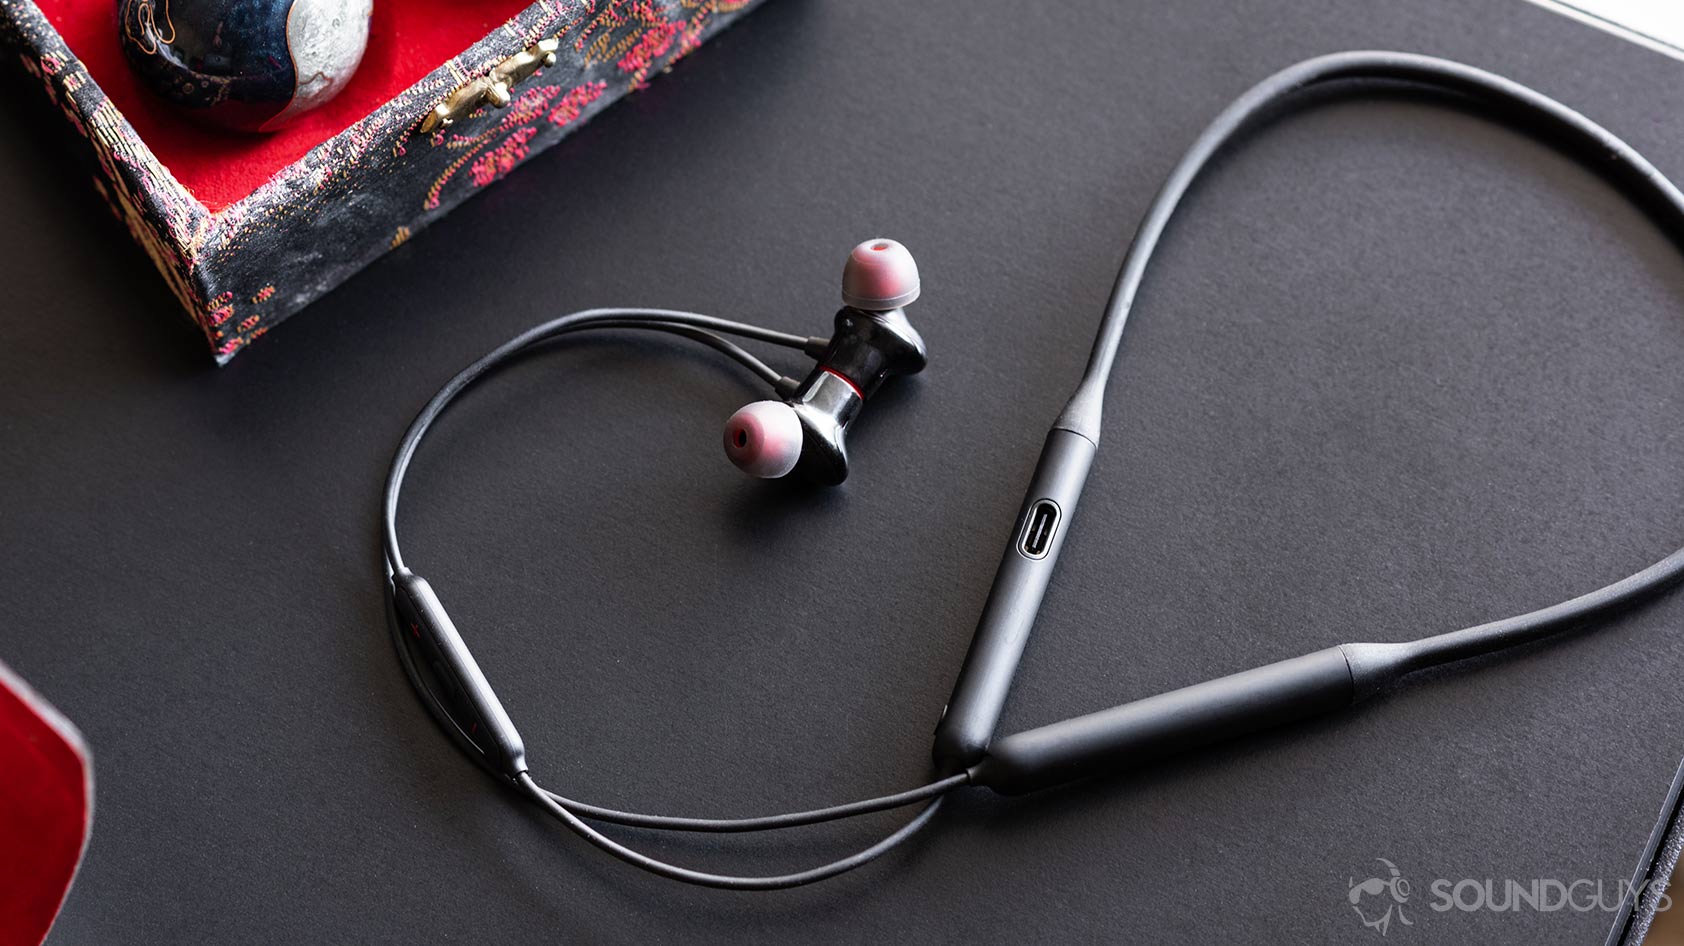 A picture of the OnePlus Bullets Wireless 2 earbuds and neckband with the cable curling up and around on a black table.